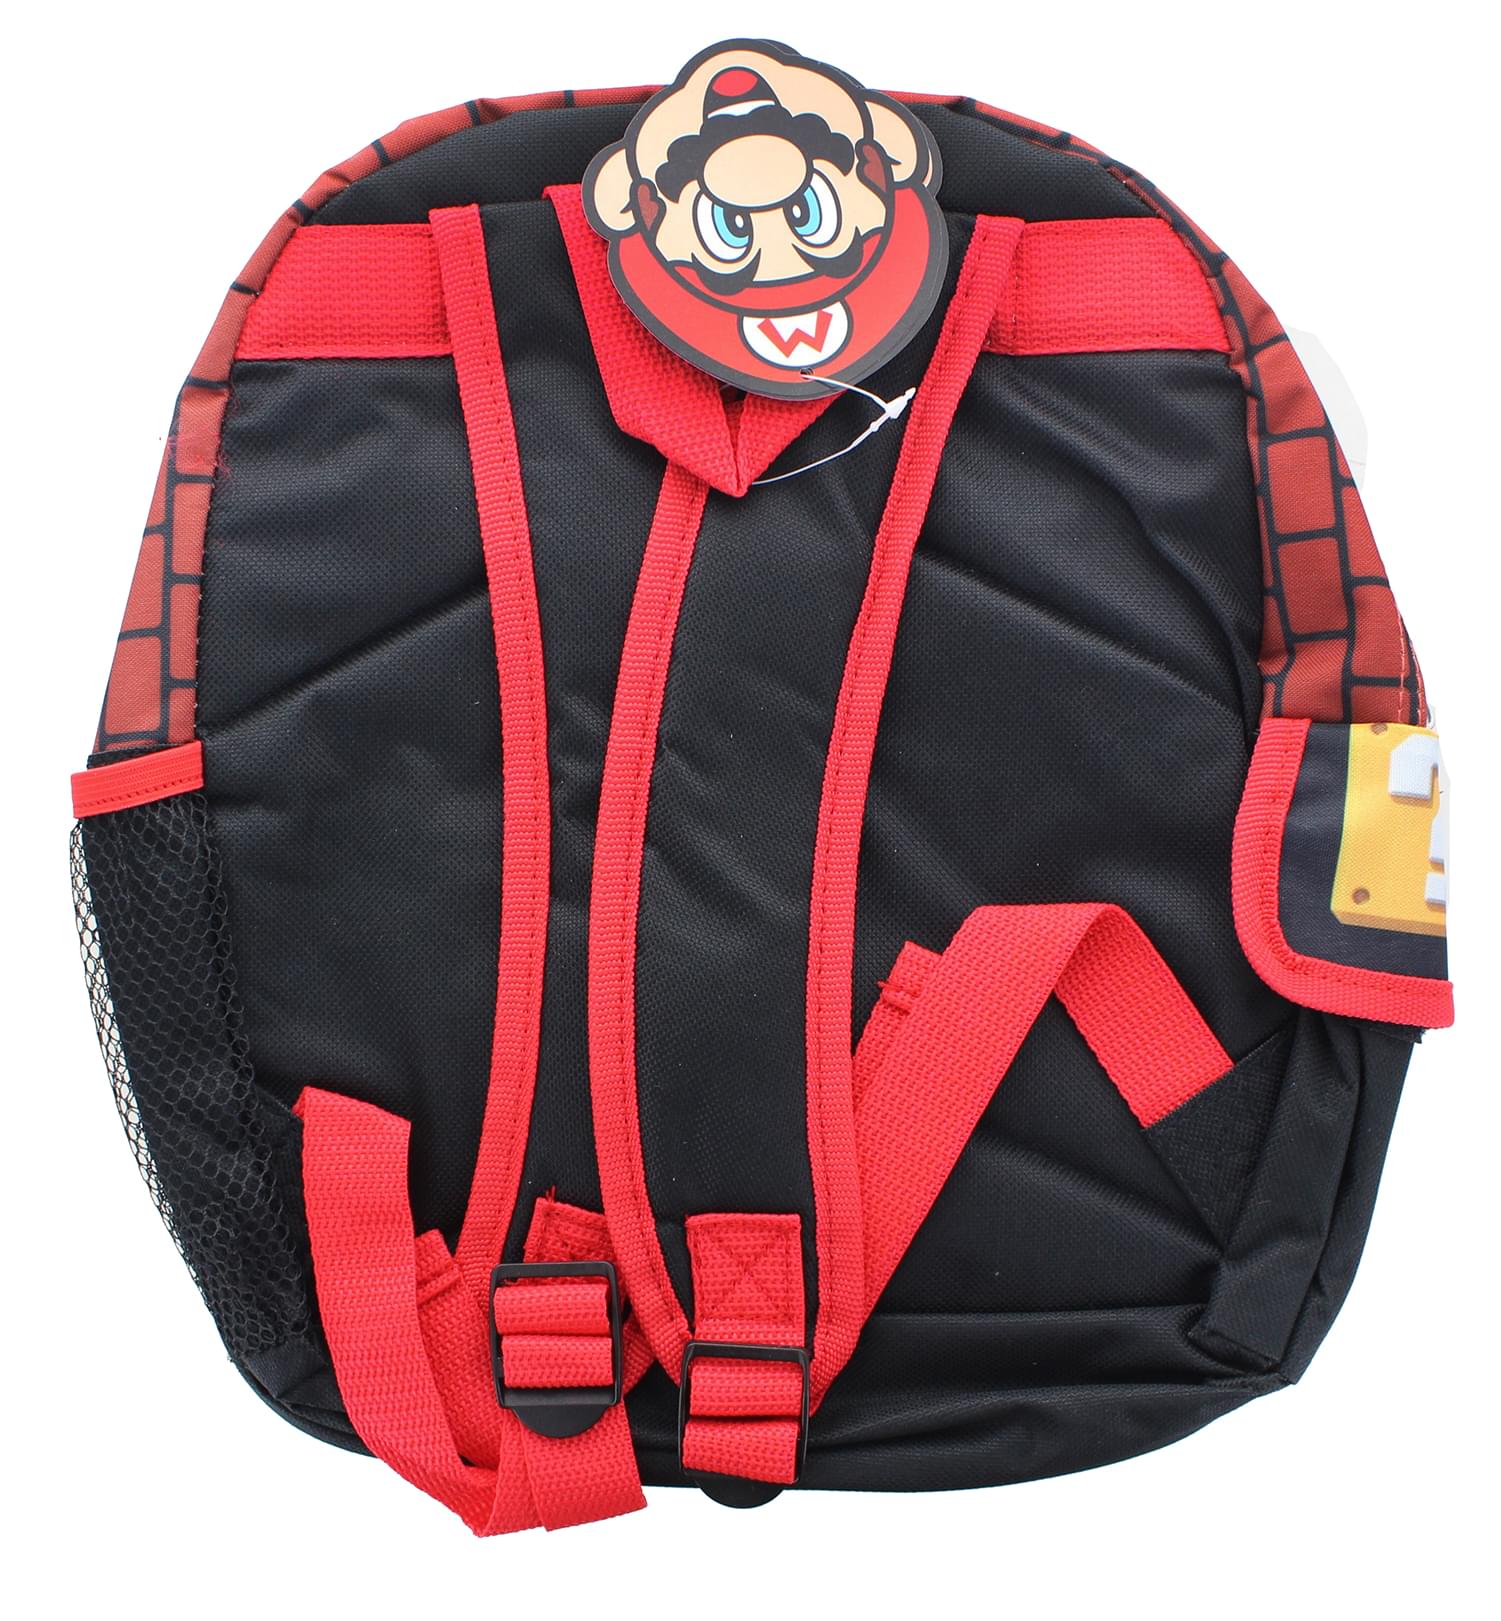 Super Mario 12 Inch Kids Backpack with Printed Straps